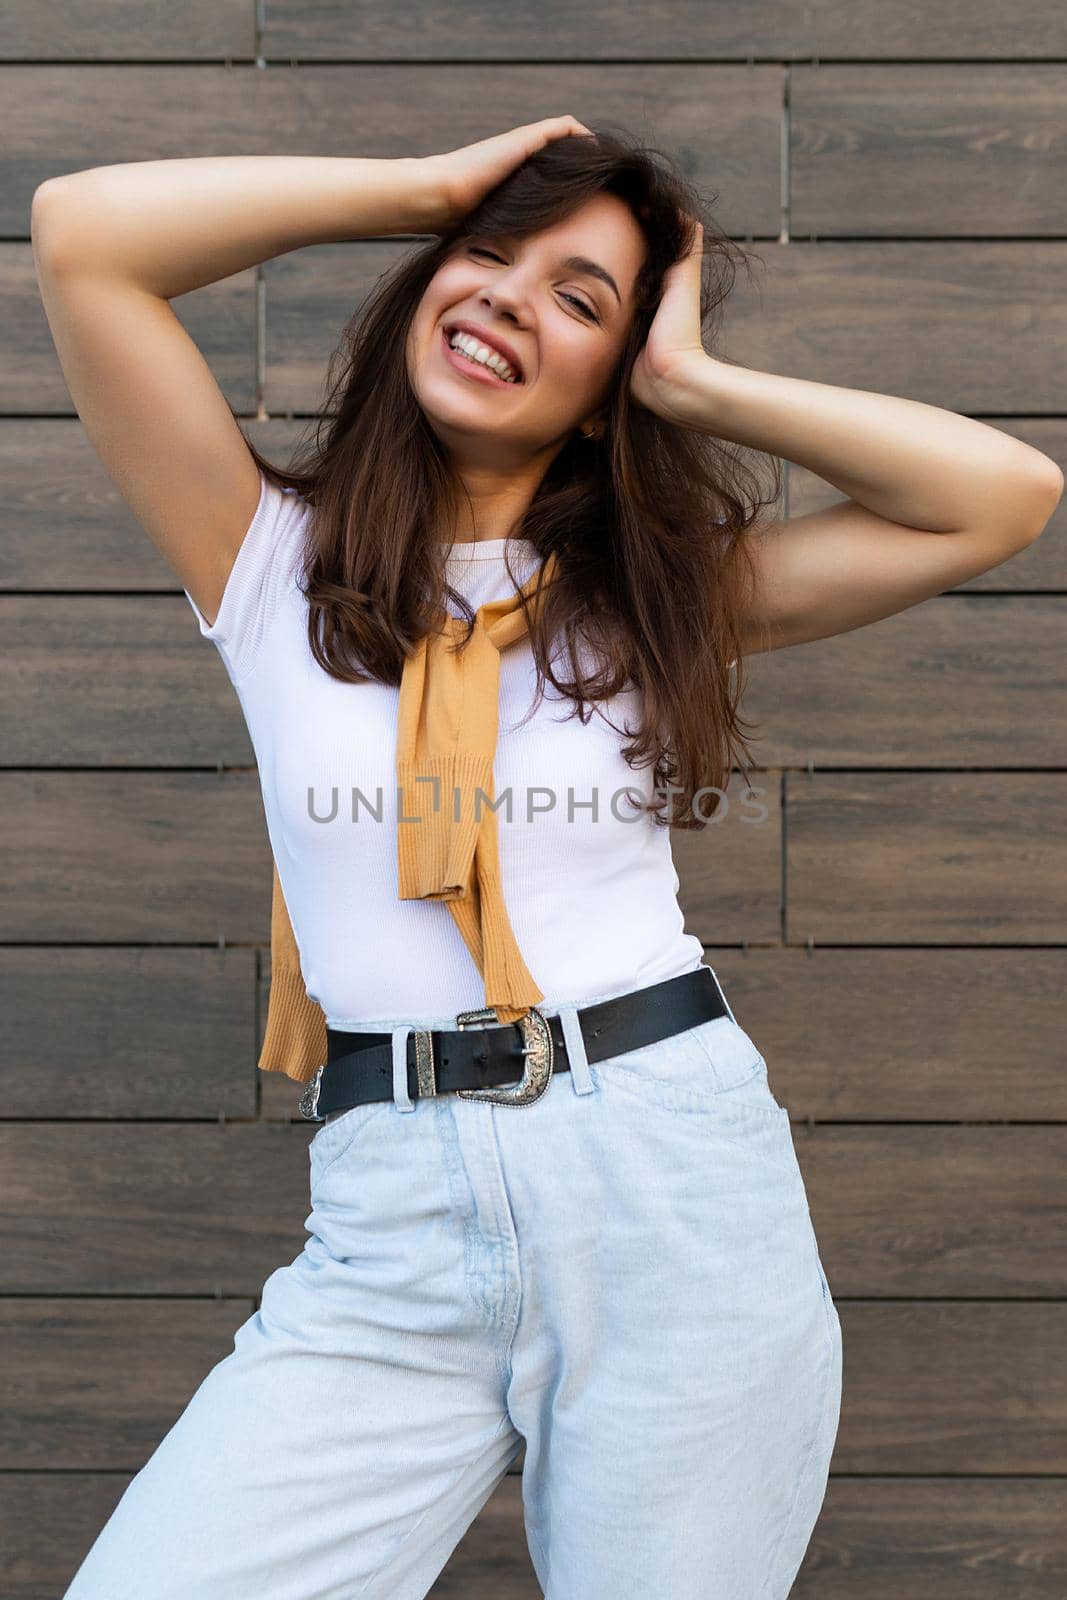 Vertical ptoto of young beautiful smiling positive happy brunette woman standing against brown wall in the street and wearing stylish outfit.